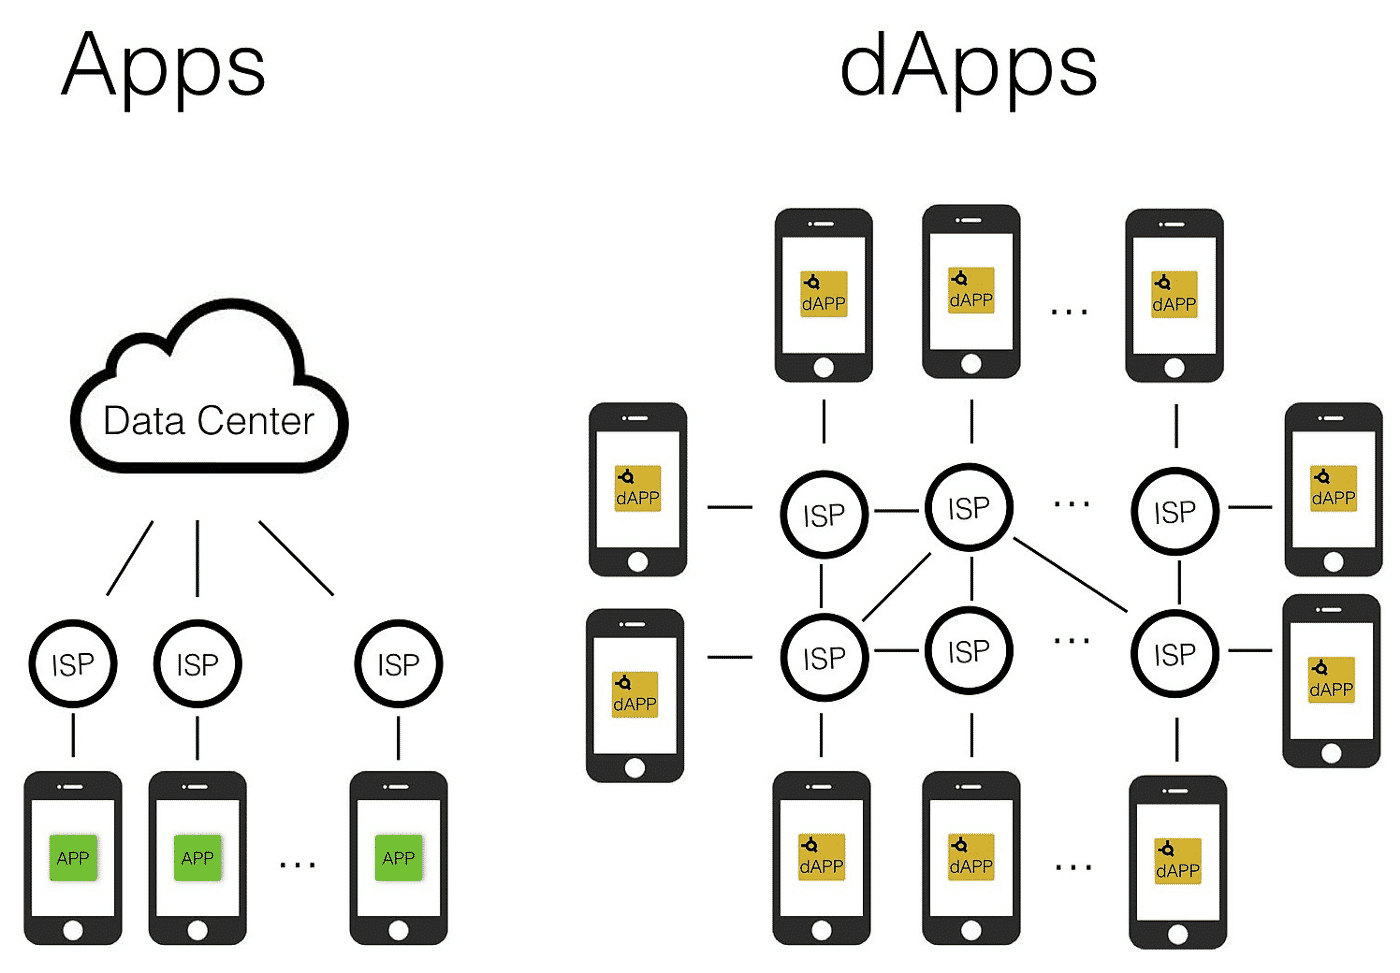 Difference between traditional apps and dApps